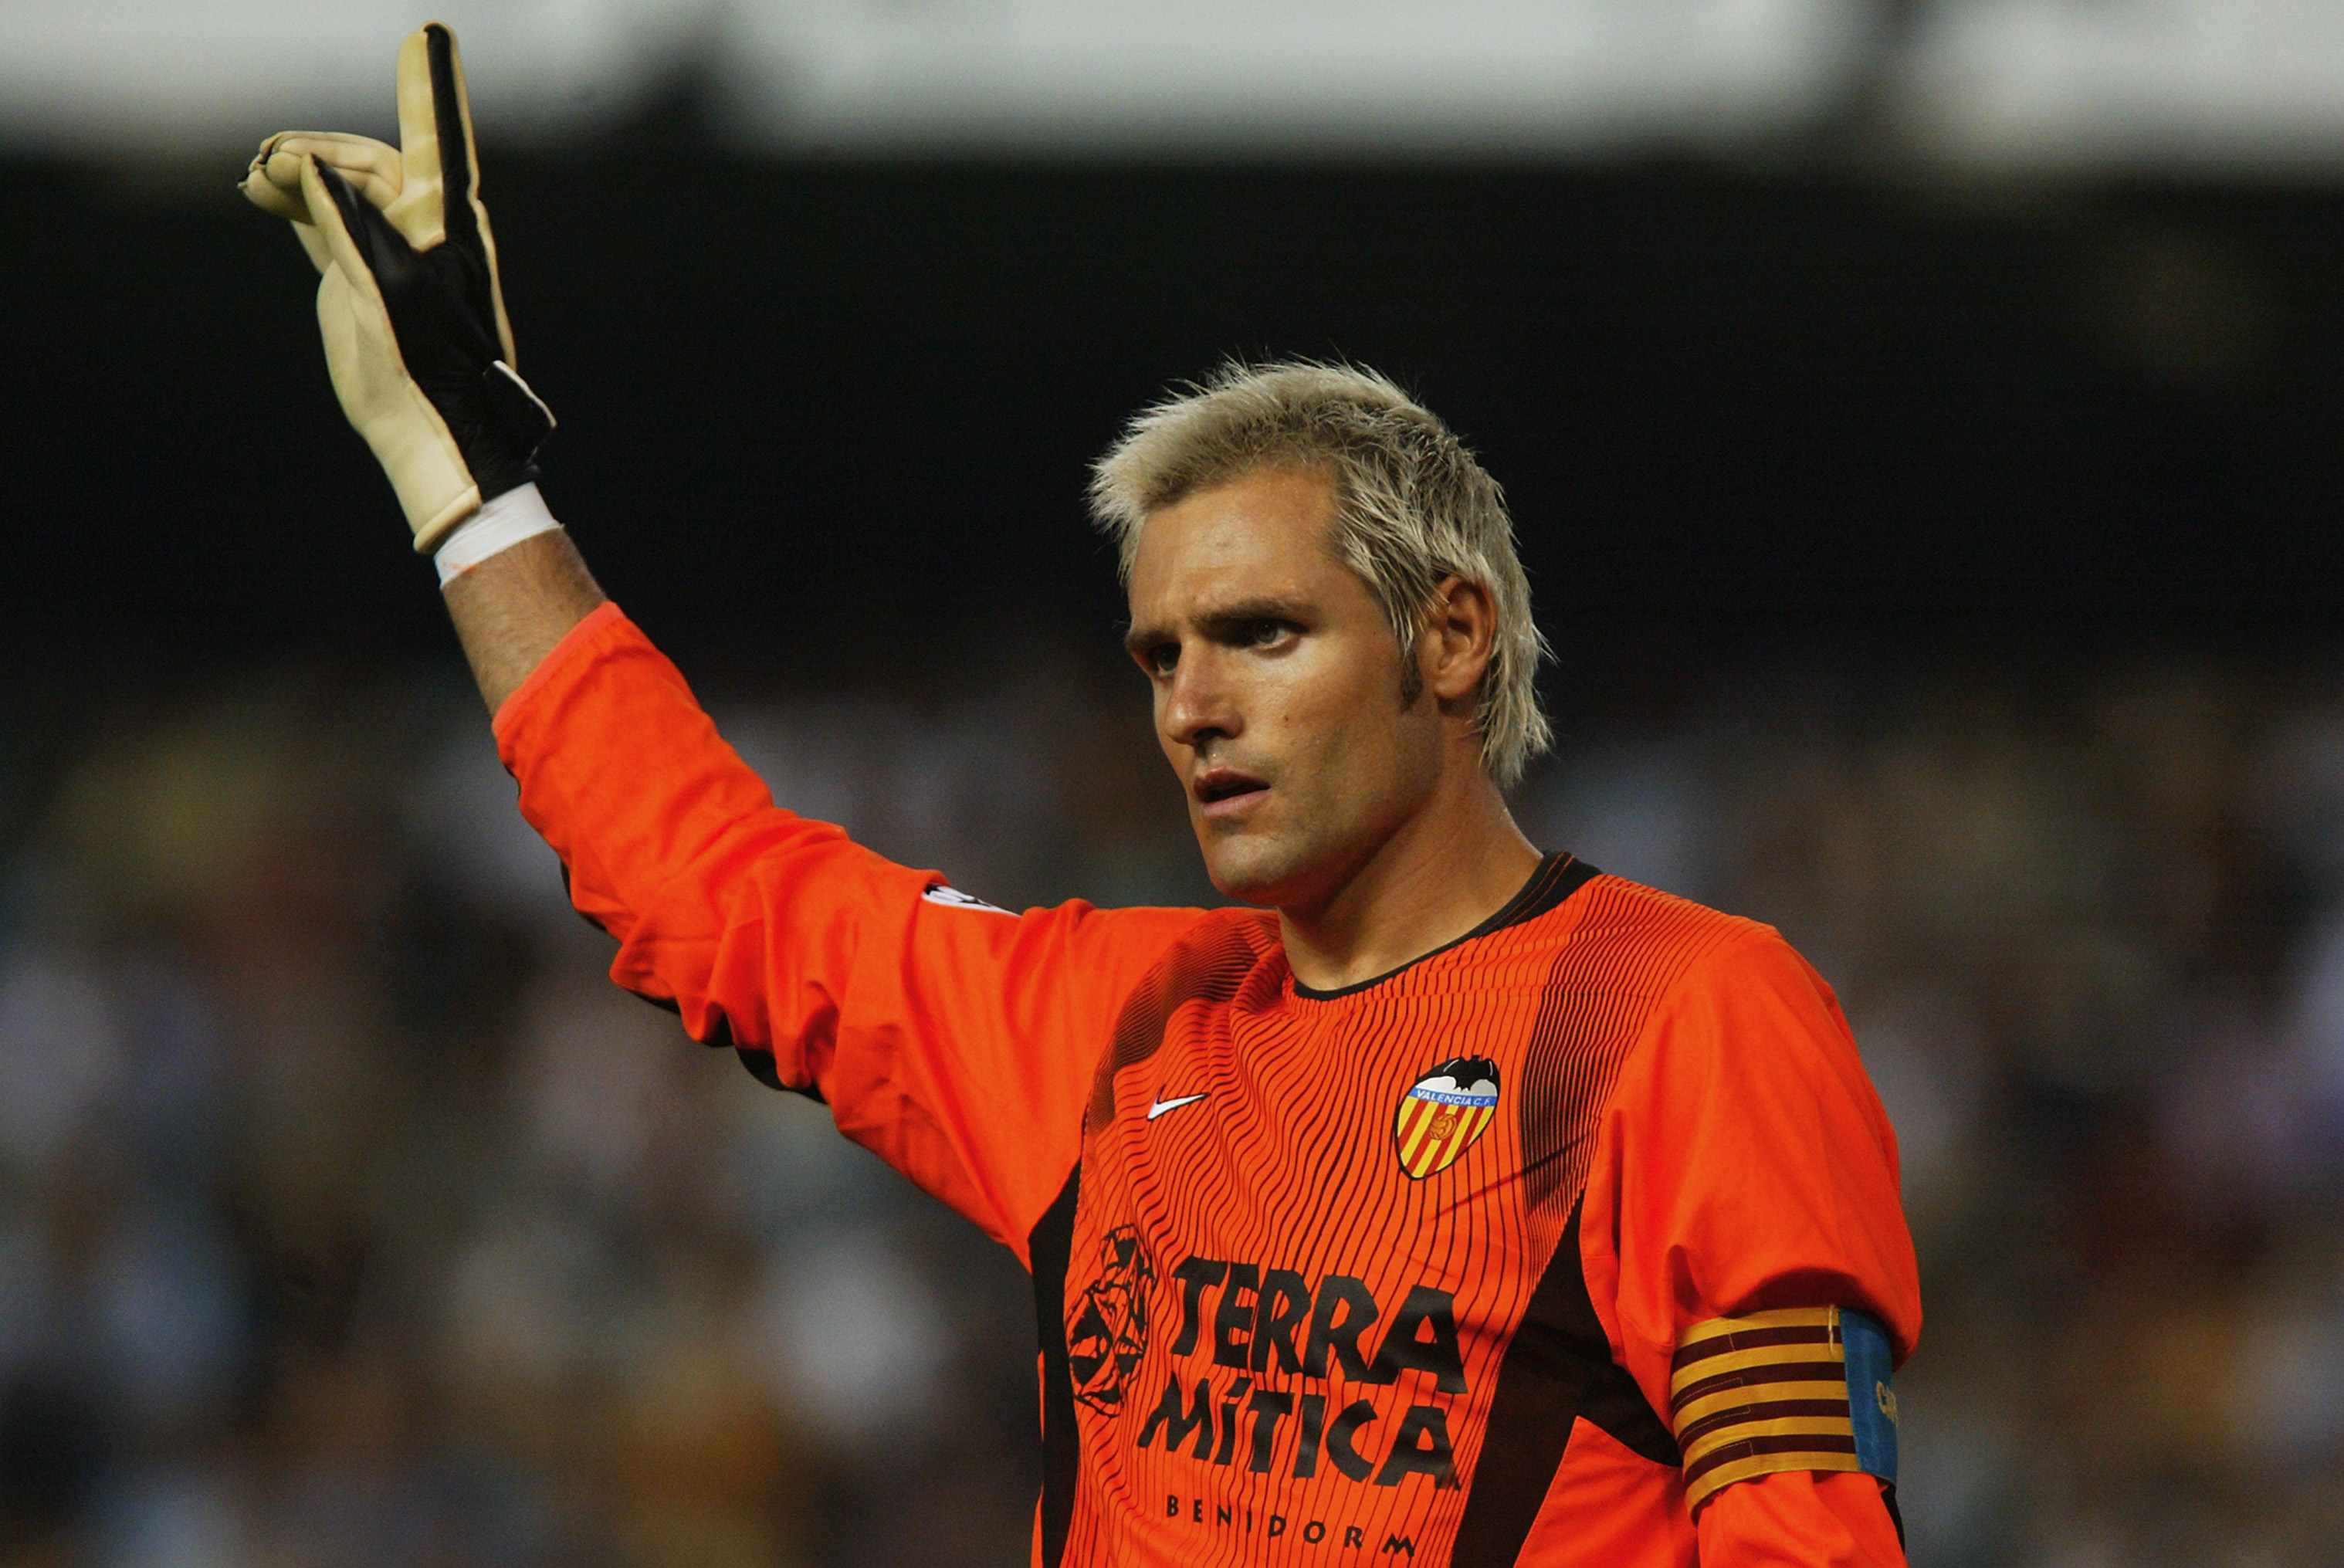 Santiago Cañizares in action for Valencia against Liverpool in September 2002.